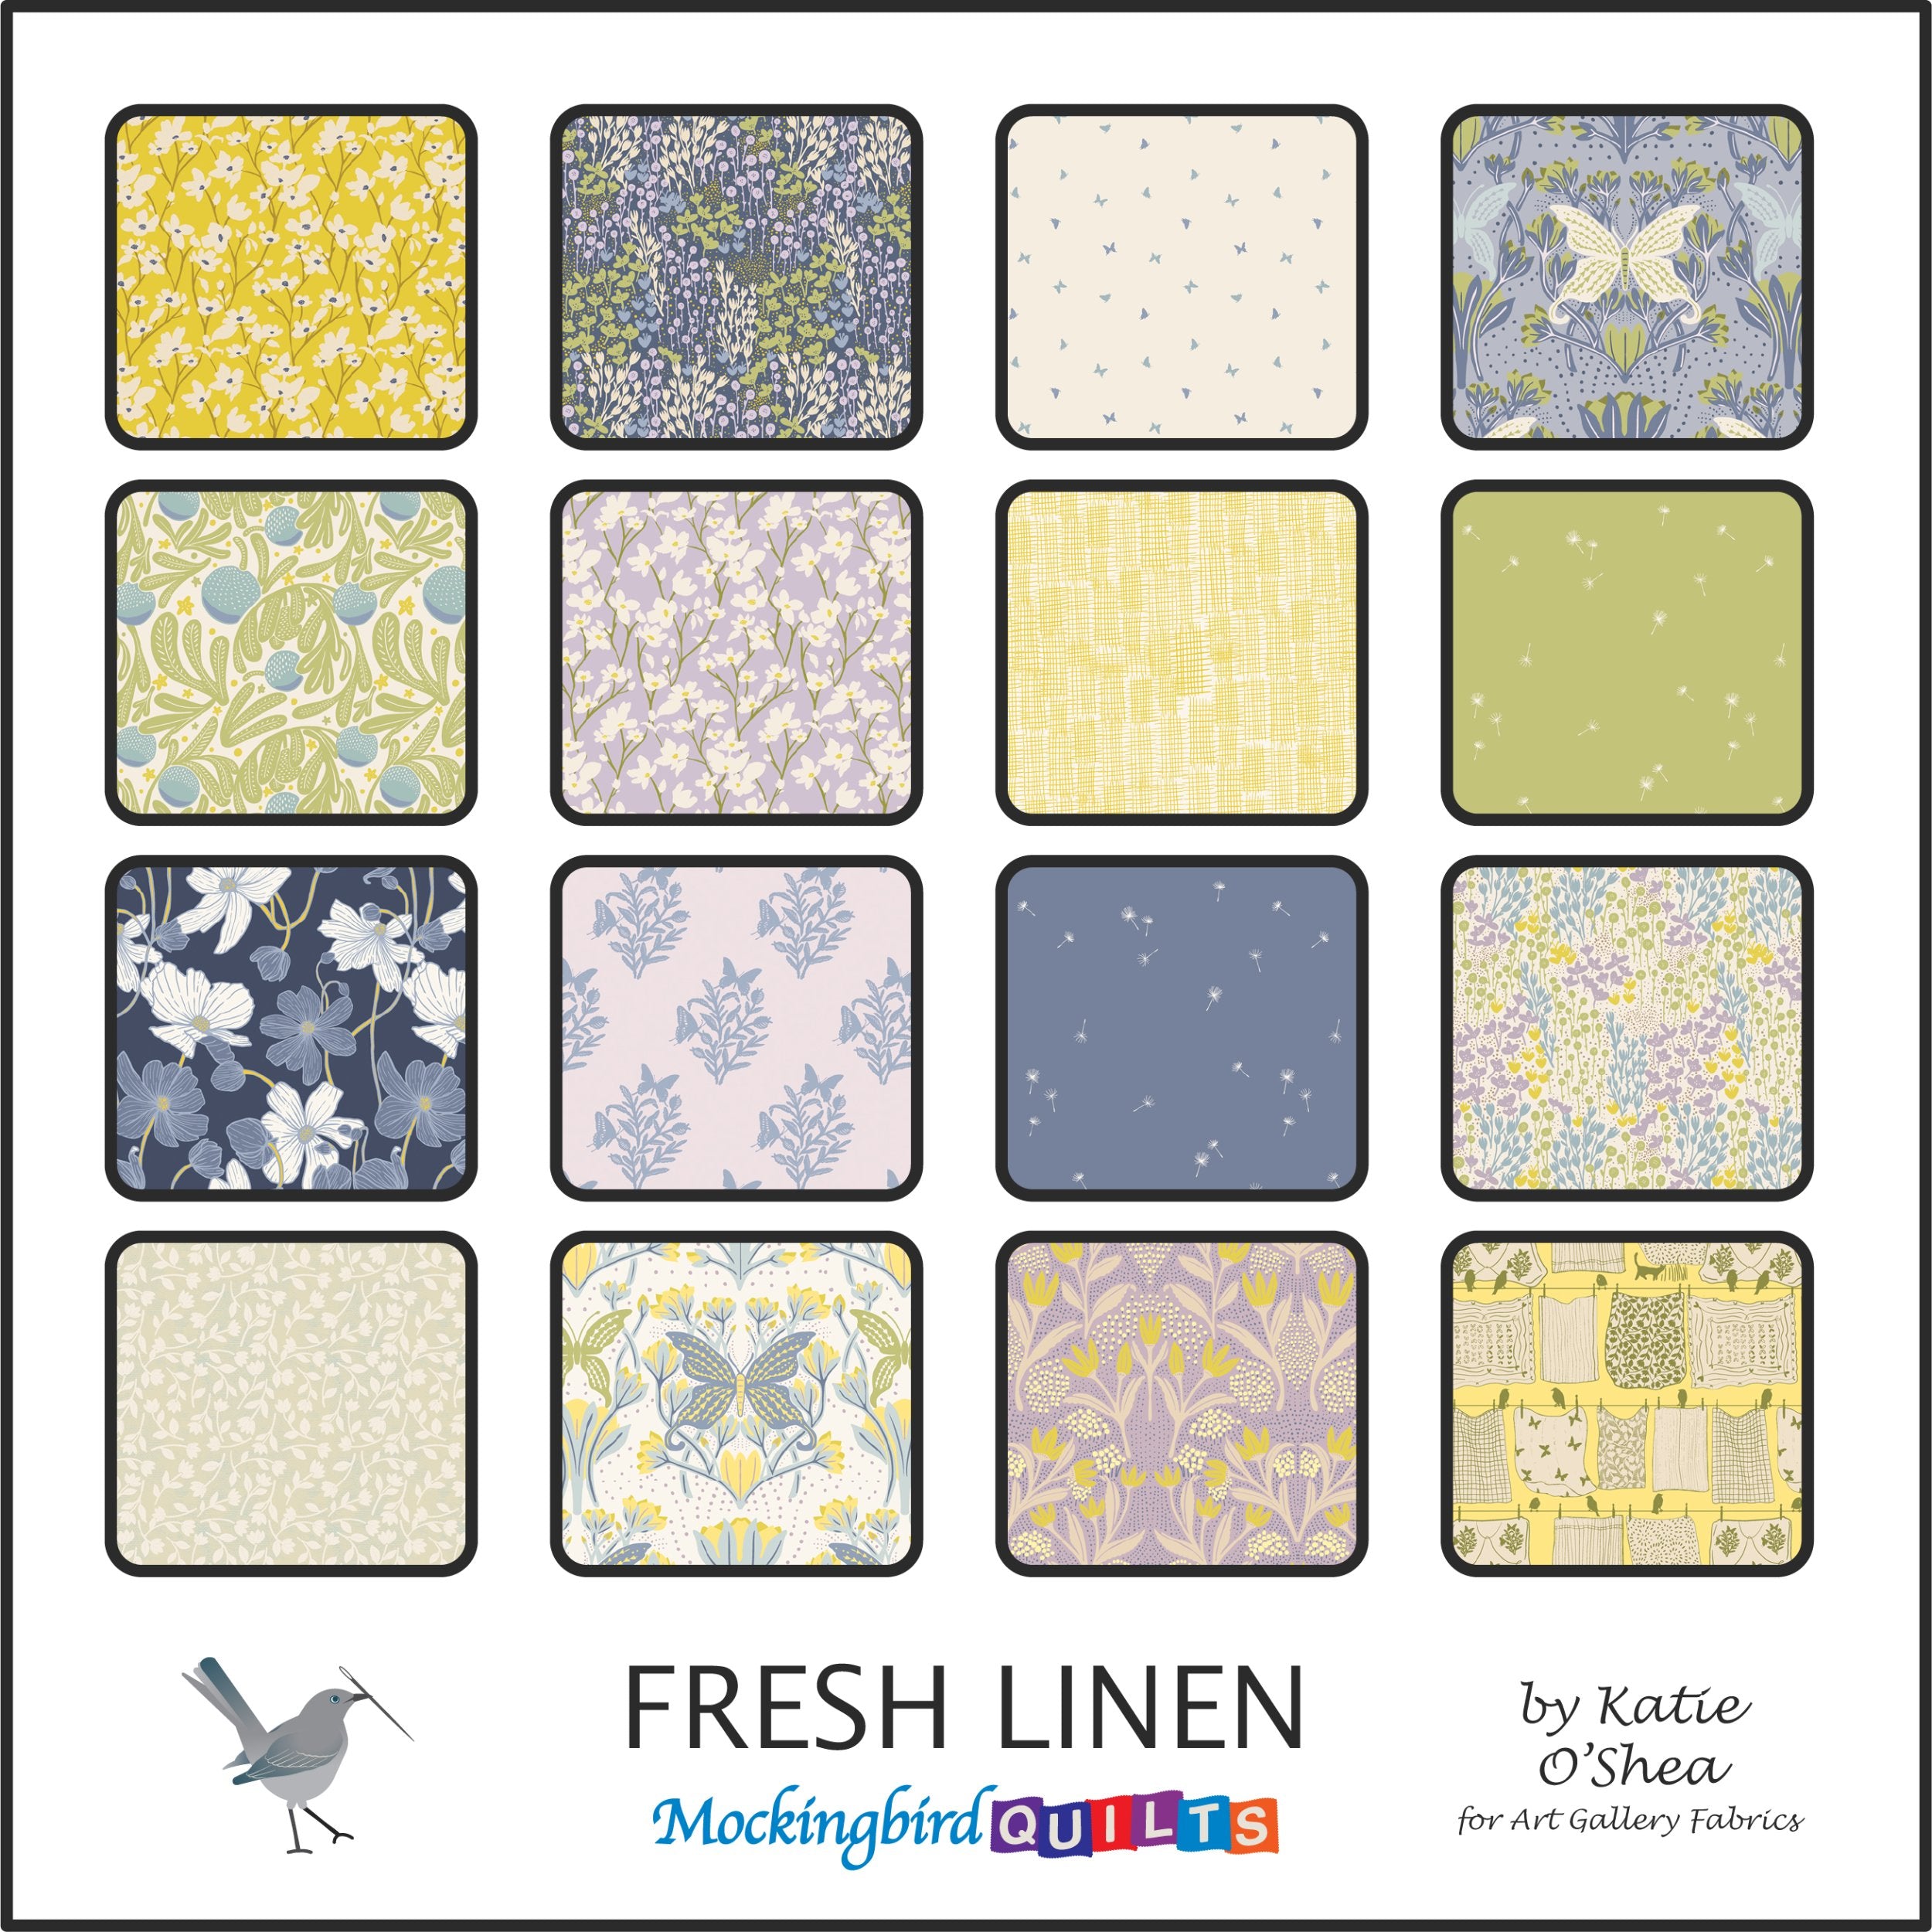 This image shows sixteen fabric swatches in the collection “Fresh Linen” by Katie O’Shea for Art Gallery Fabrics. This line was inspired by laundry drying in spring, with pastel hues, nature-inspired patterns, plus a few quirky laundry-themed pieces.